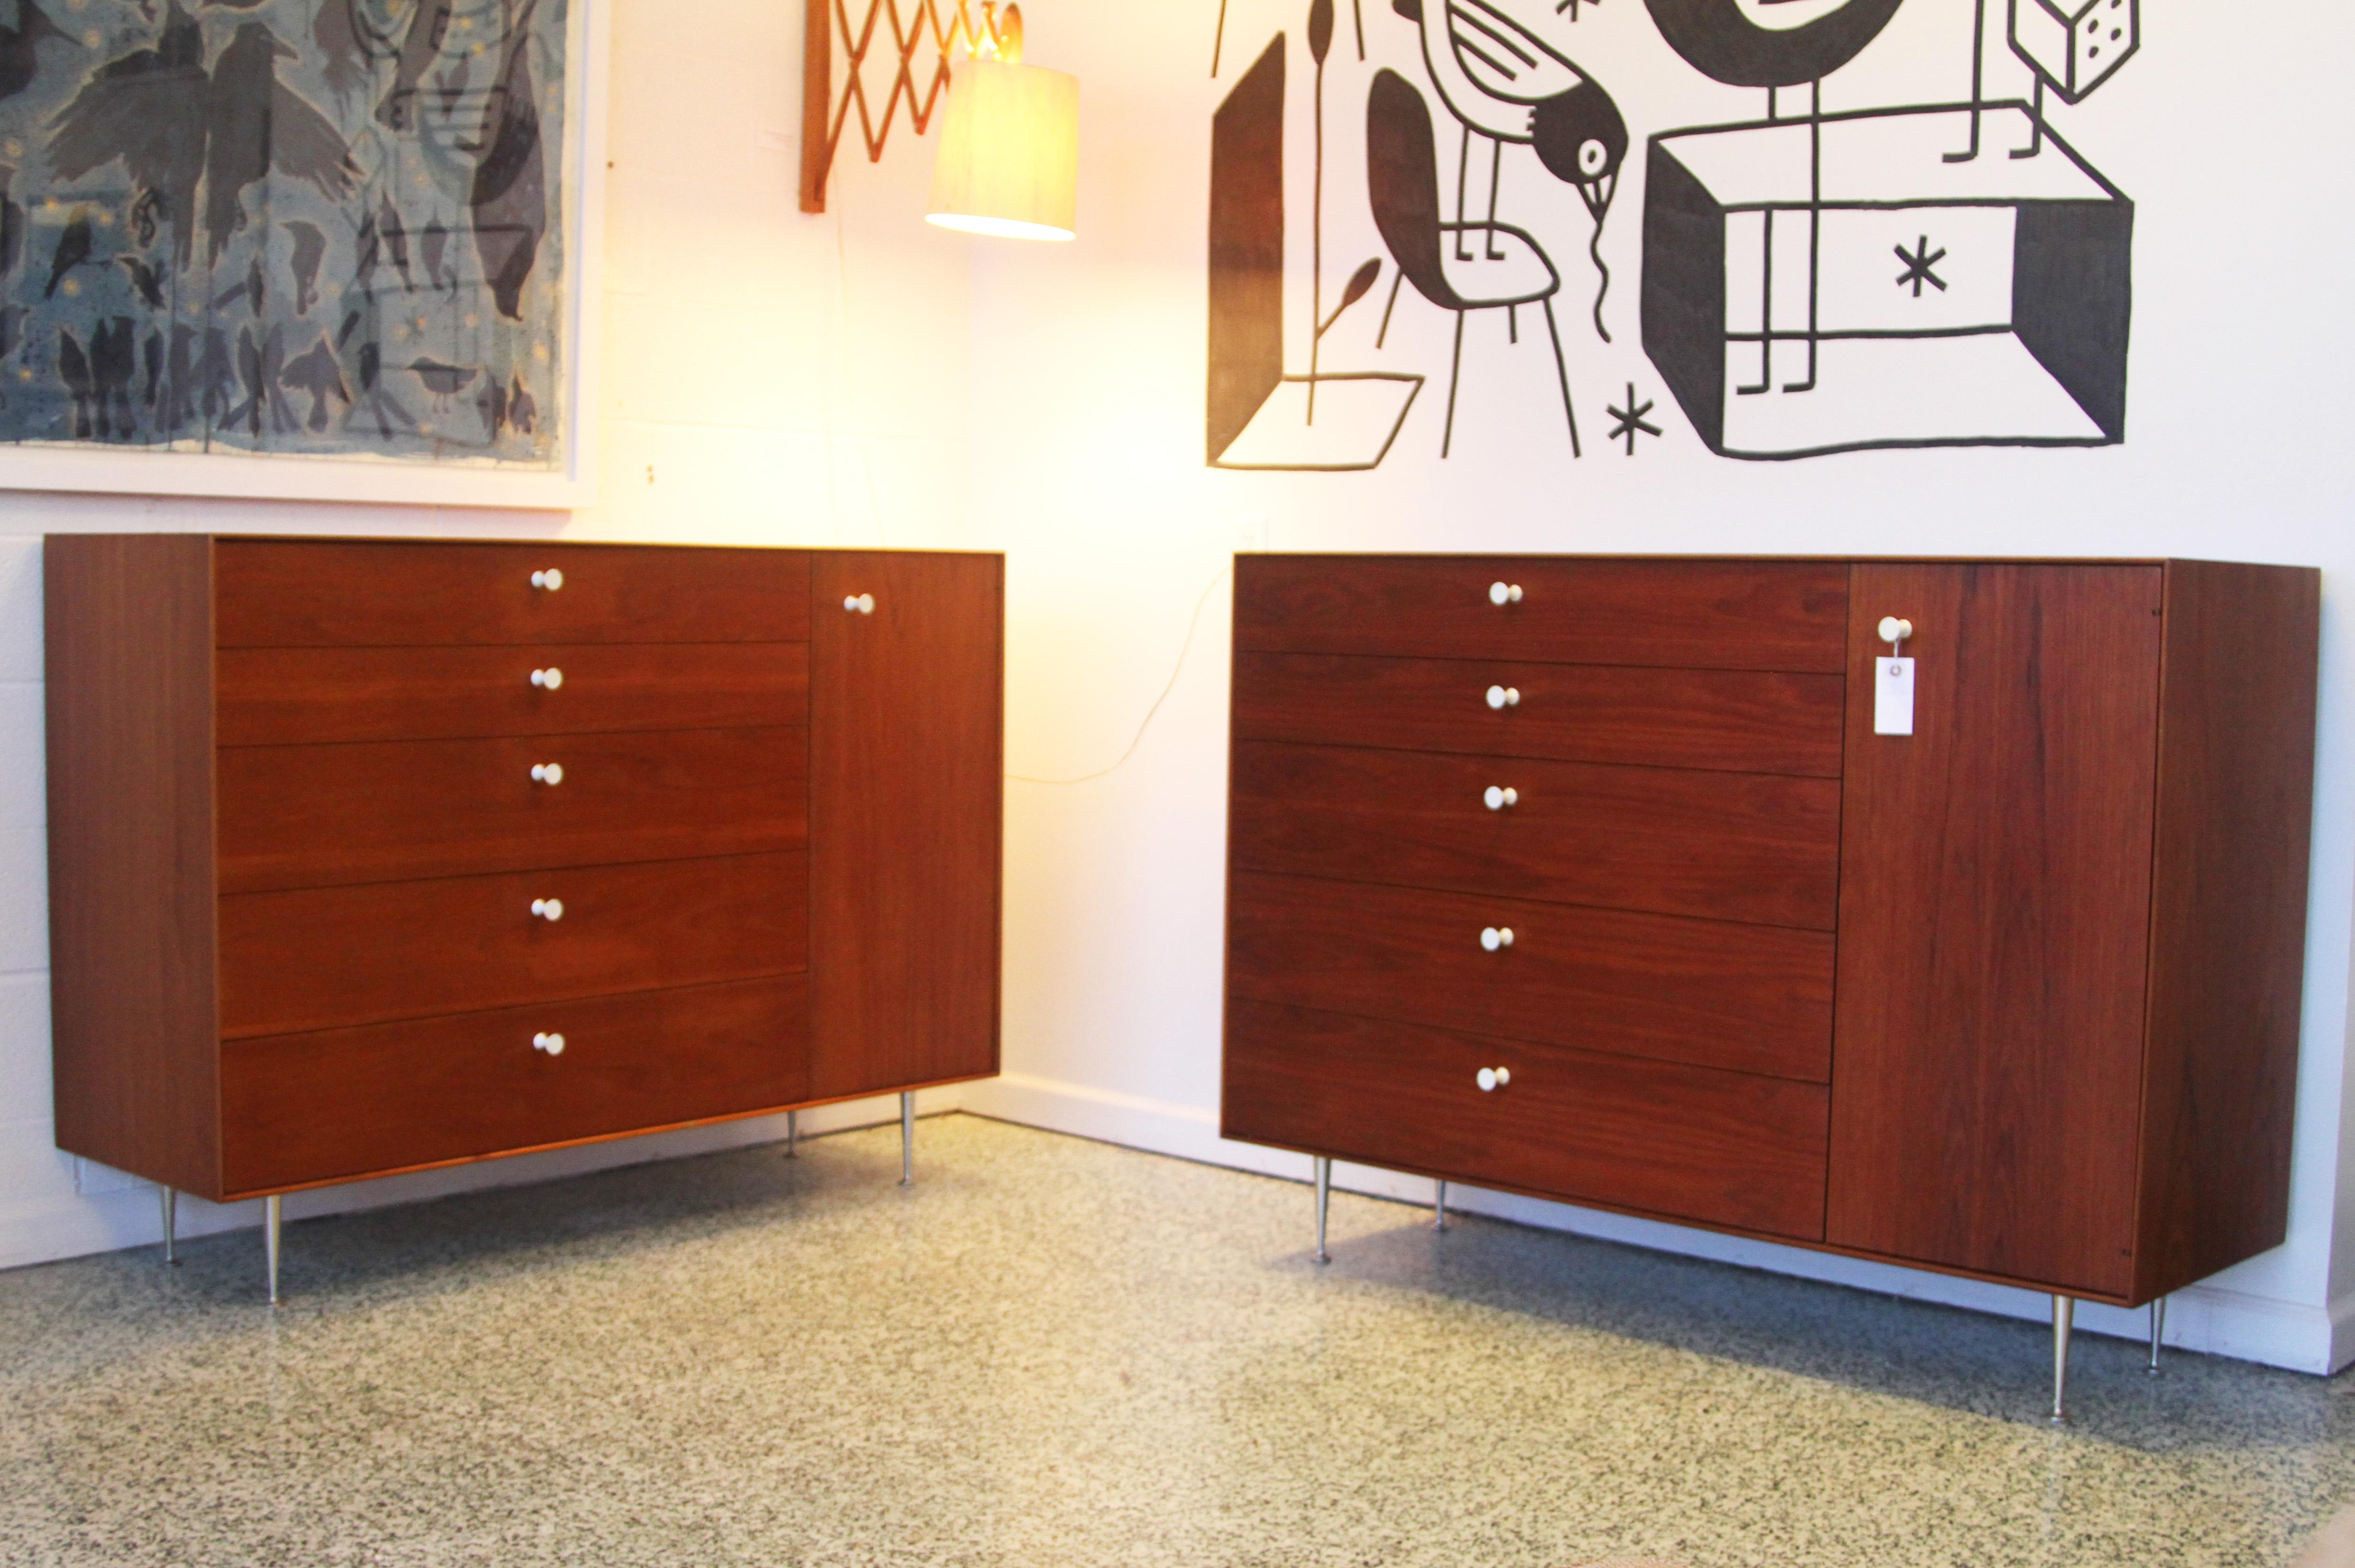 Designer: George Nelson 
Manufacture: Herman Miller 
Period/style: Mid-Century Modern 
Country: USA Date: 1950s

We were told from the original owner these chests are prototypes due to the second drawer being smaller than the first. The